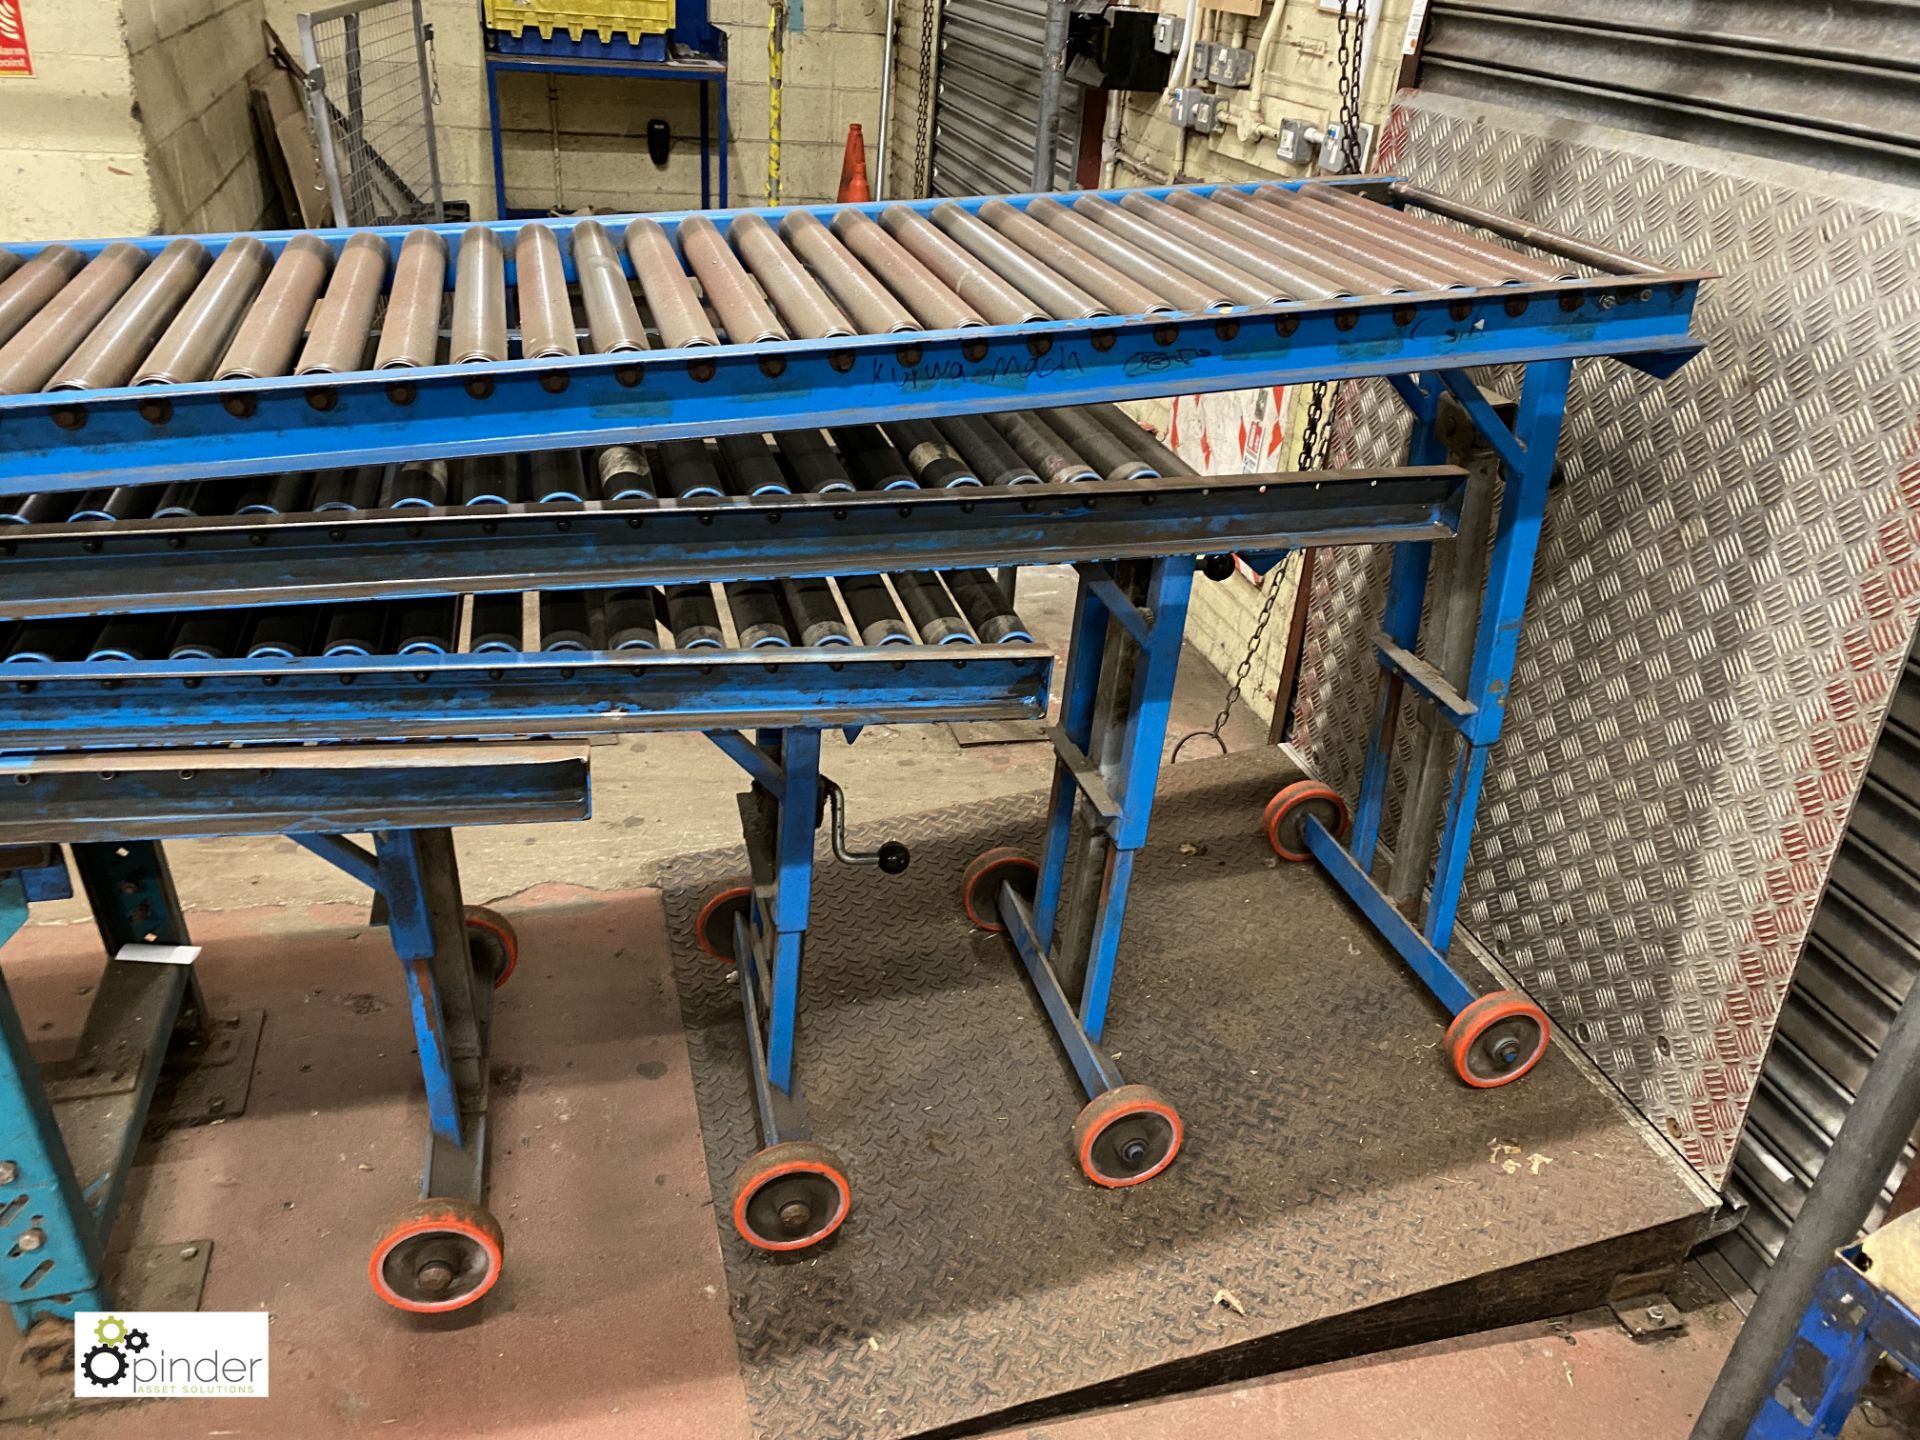 Manual extending gravity fed Roller Conveyor, 600mm roller width, closed length 4m (on ground - Image 3 of 4